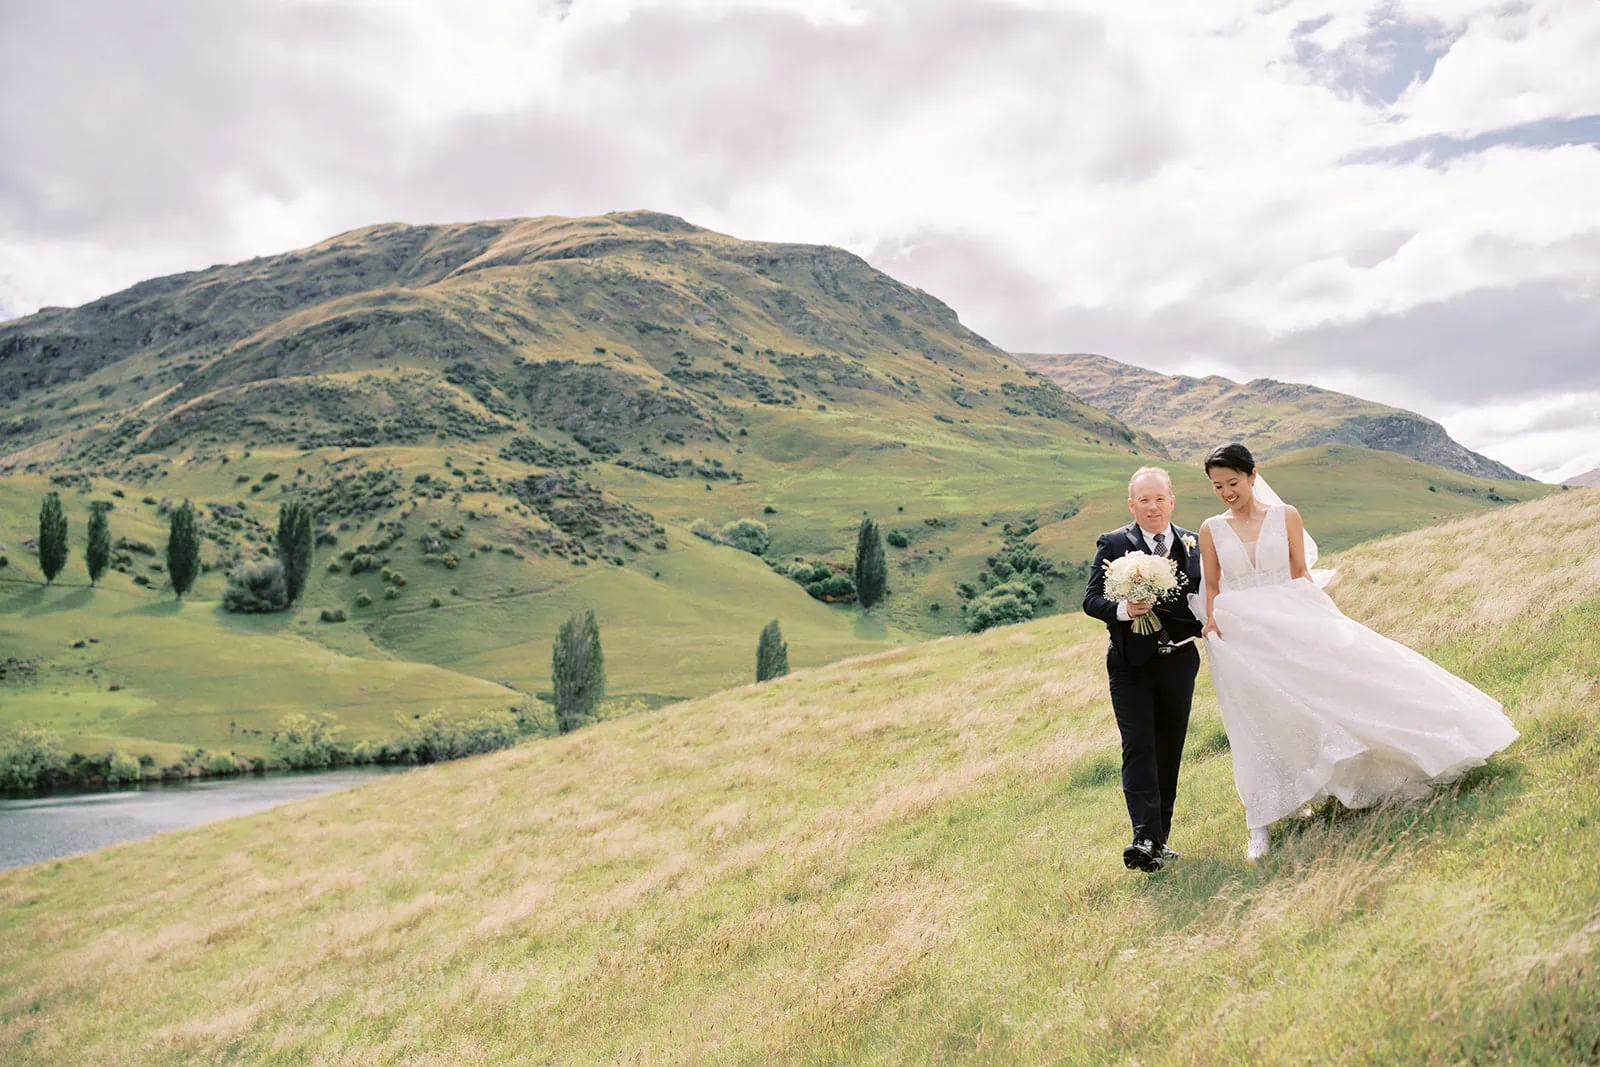 Queenstown Elopement Heli Wedding Photographer クイーンズタウン結婚式 | Meng & Joel's Stoneridge Estate Wedding captures the couple's romantic stroll through a captivating grassy field, surrounded by majestic mountains in the background.